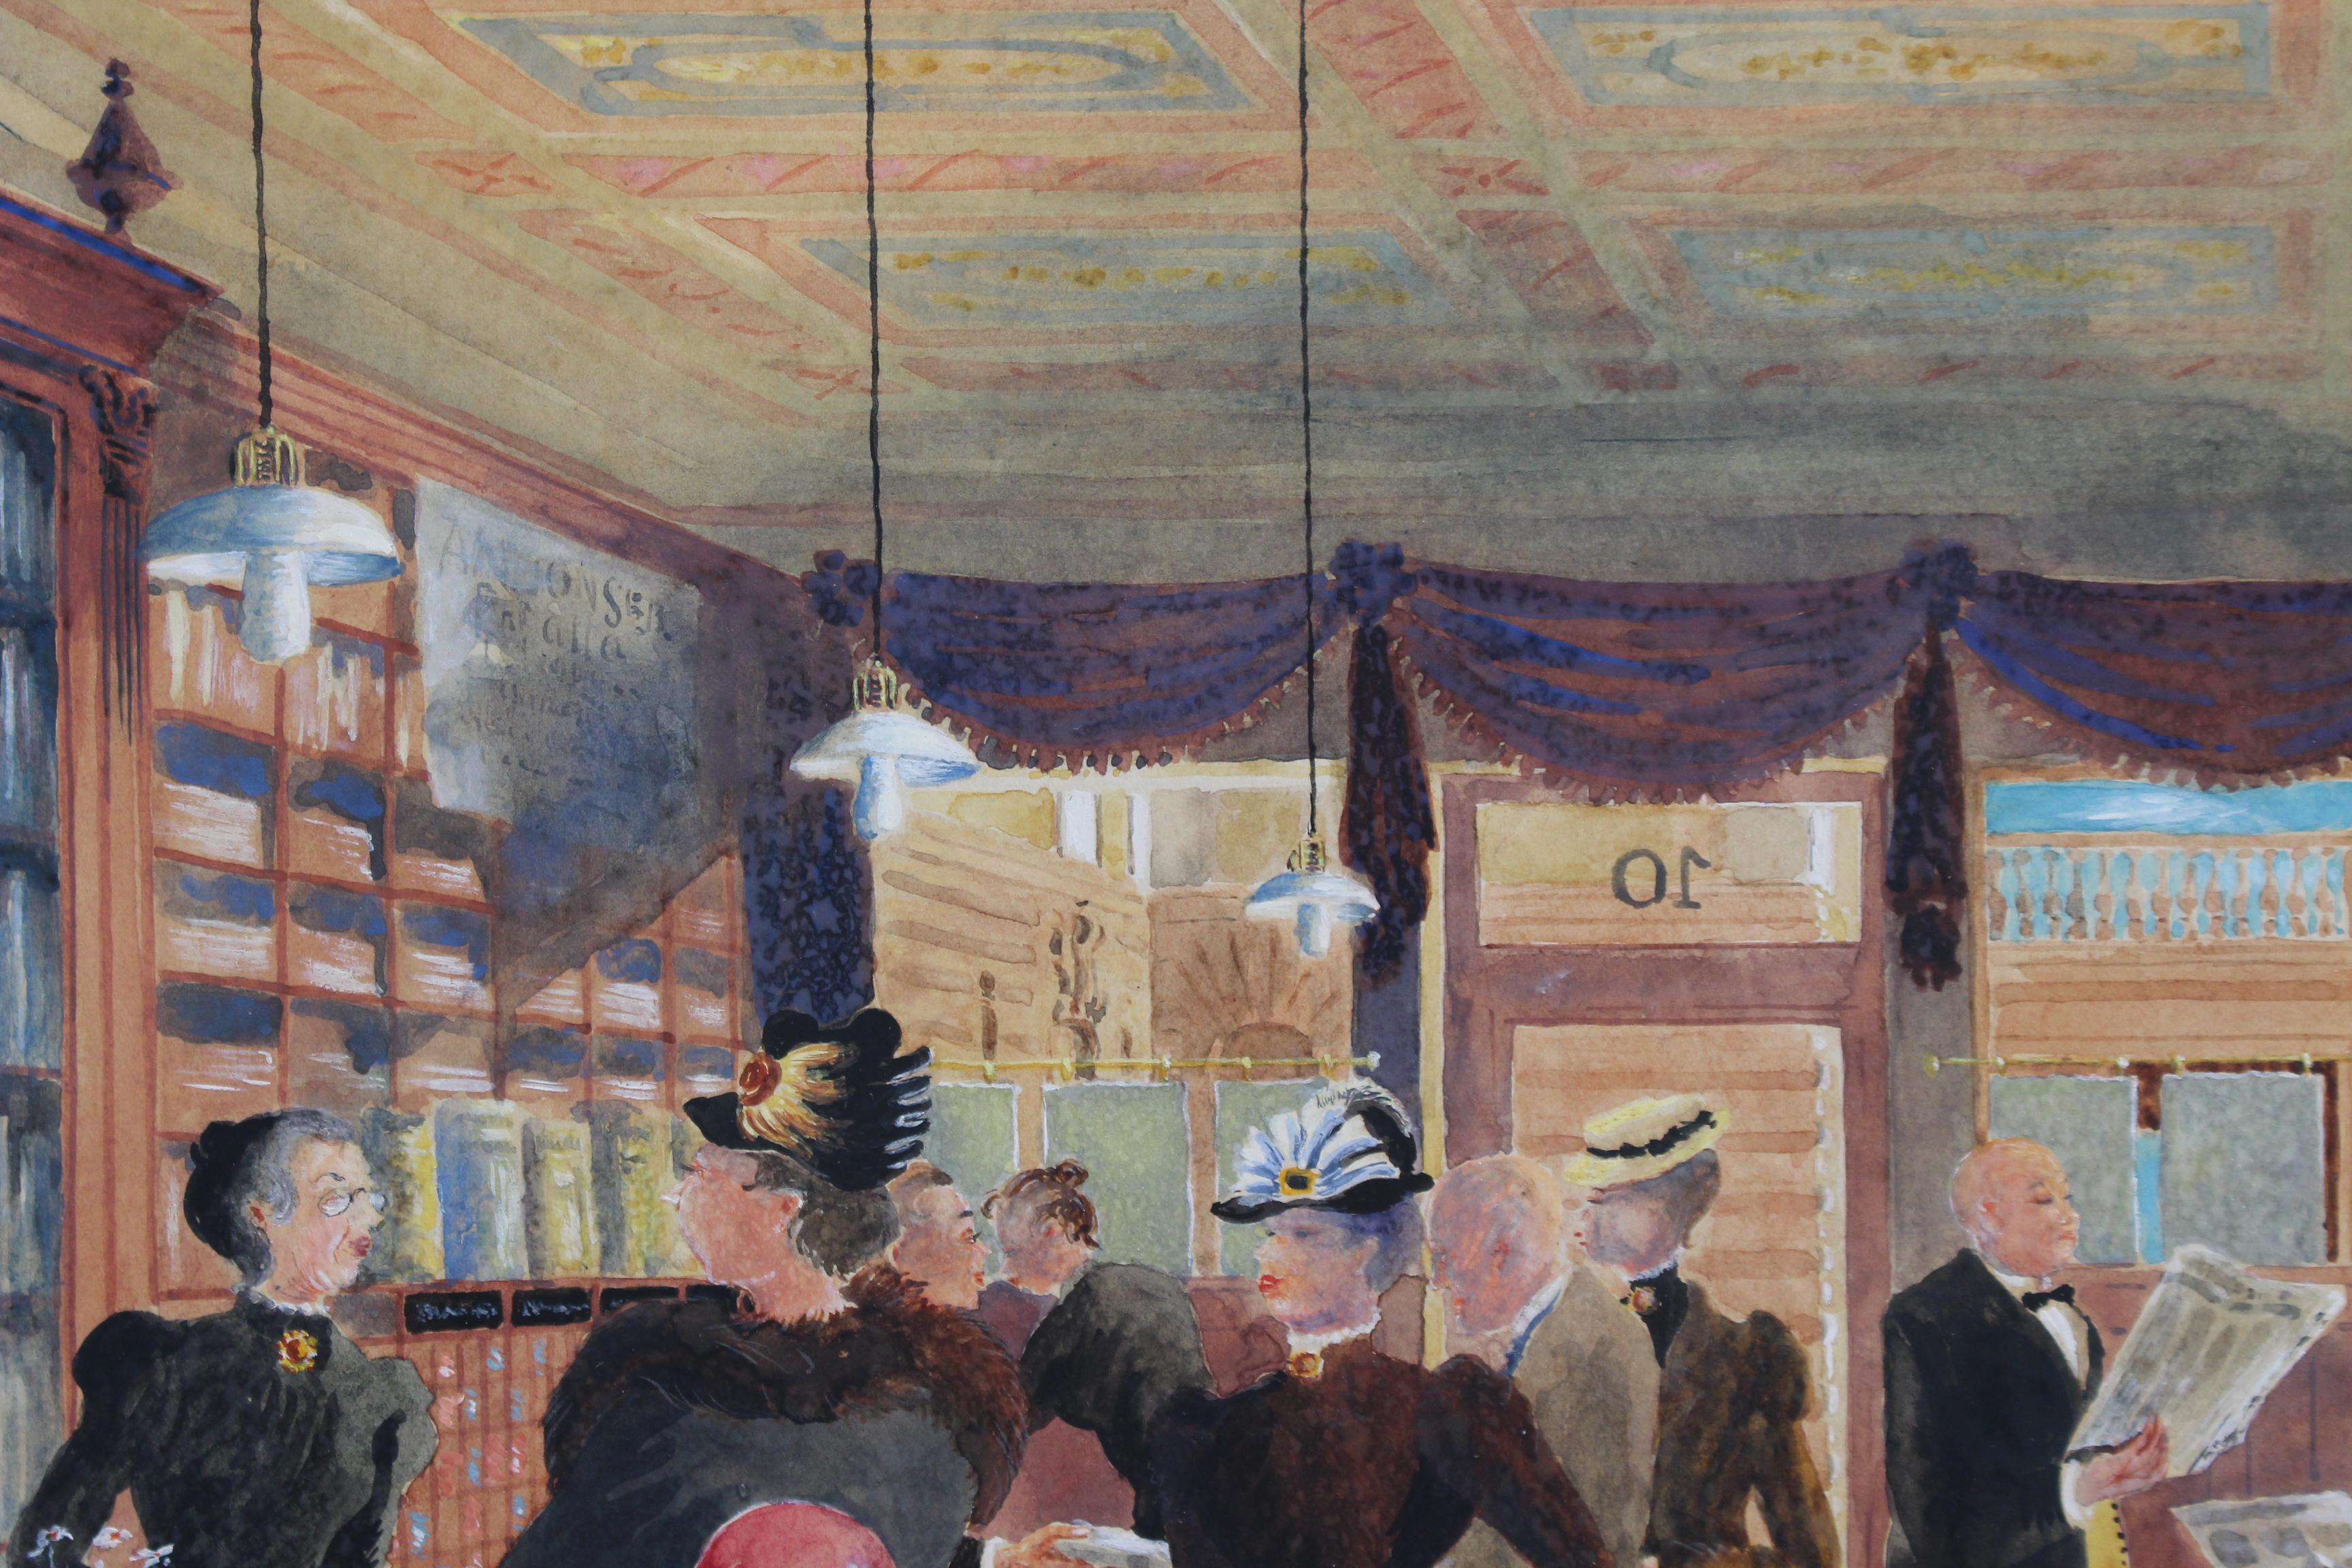 'Sunday Morning at the News Agent Stockholm', gouache on art paper, by Rudolf Carlborg (1949). Although dated 1949, the scene depicted is closer to the turn of the 20th century. The clothing worn by the customers and staff, along with the decor hint